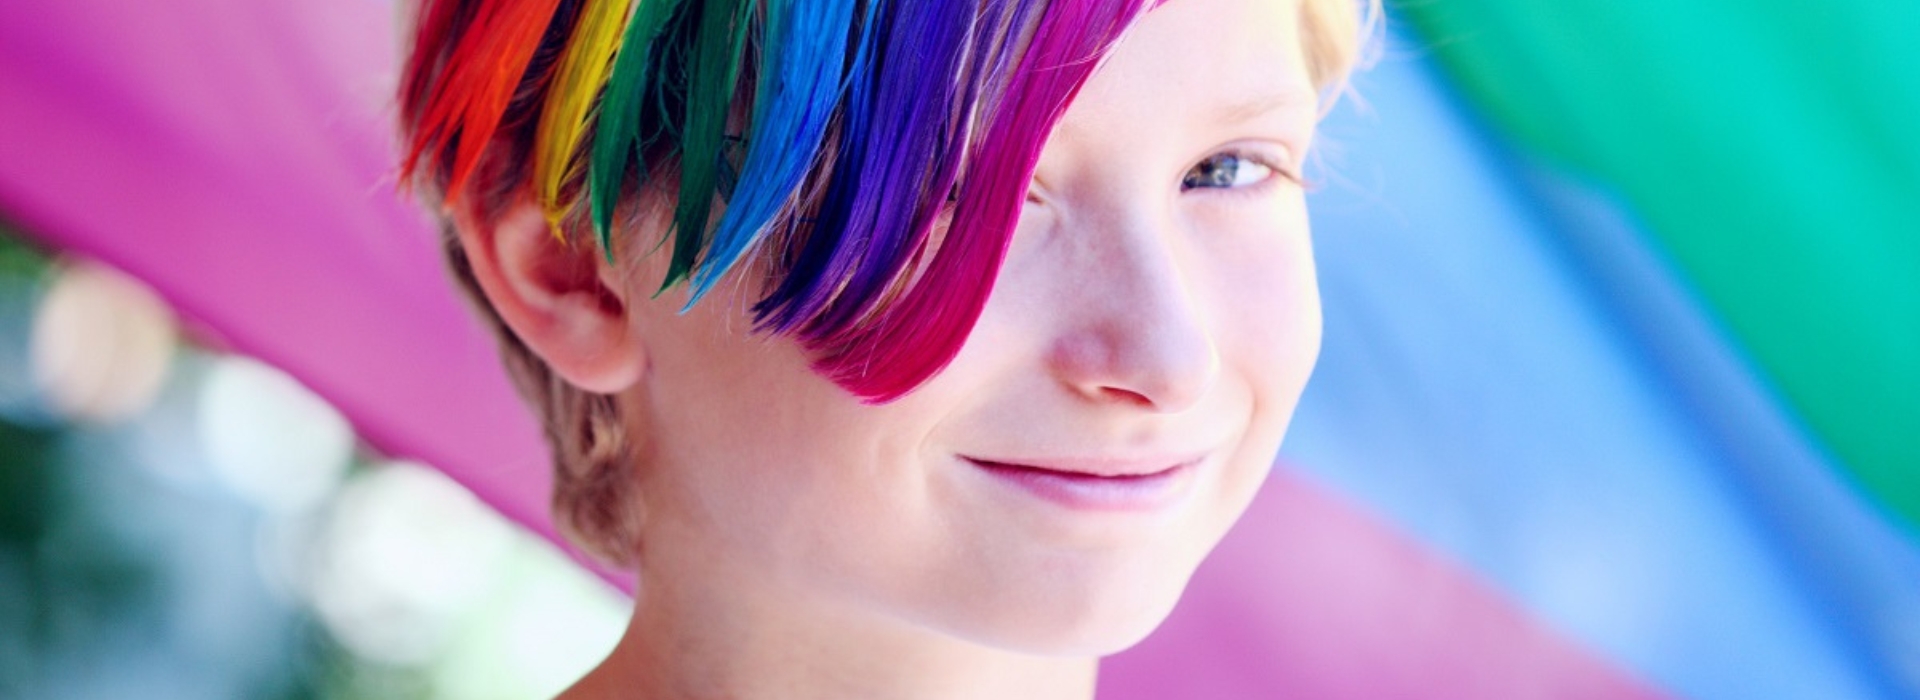 Young person with rainbow coloured hair